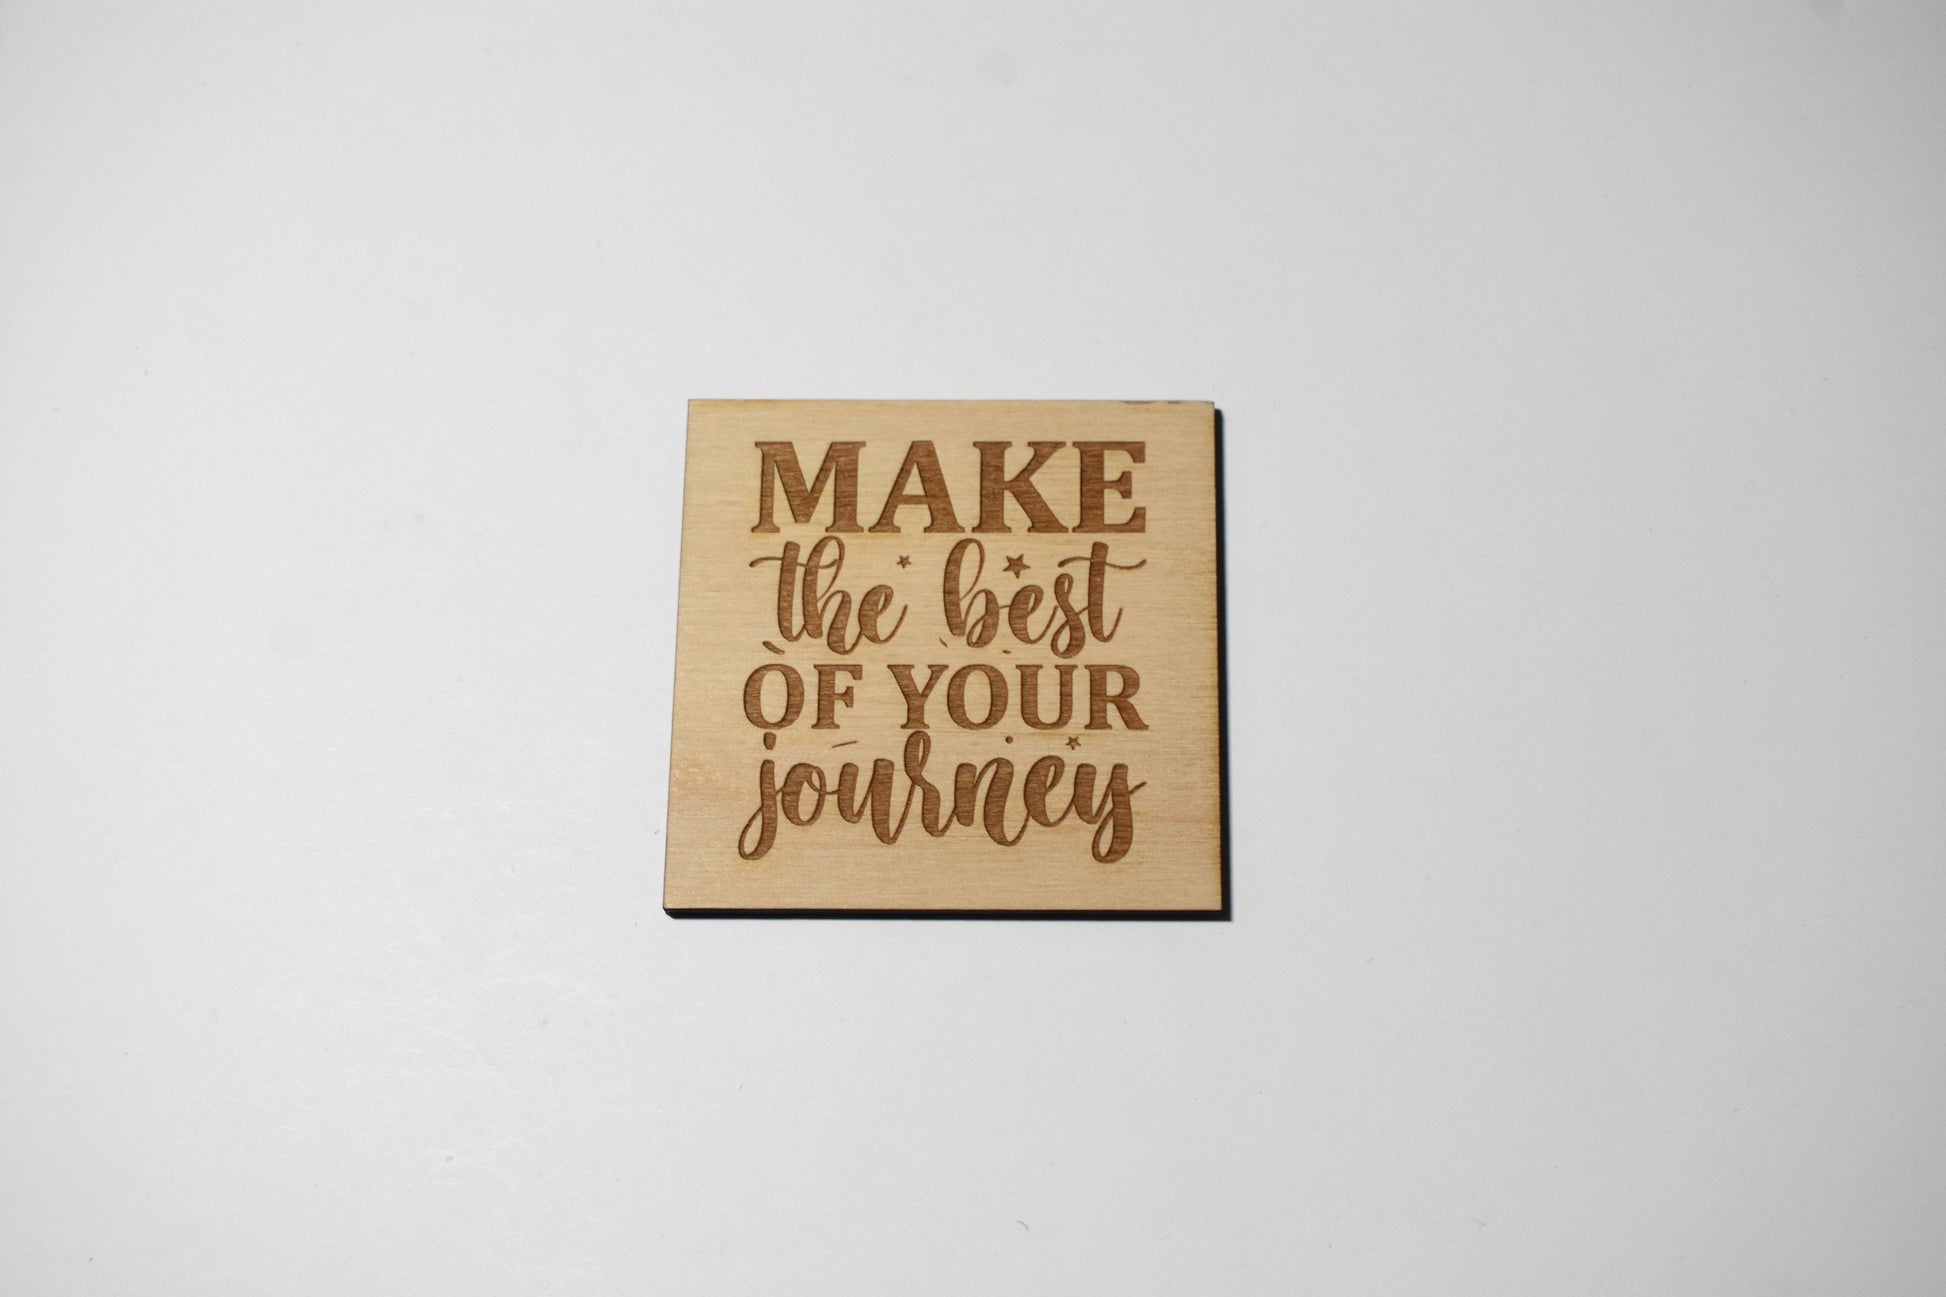 Make the best of your journey - Creative Designs By Kari